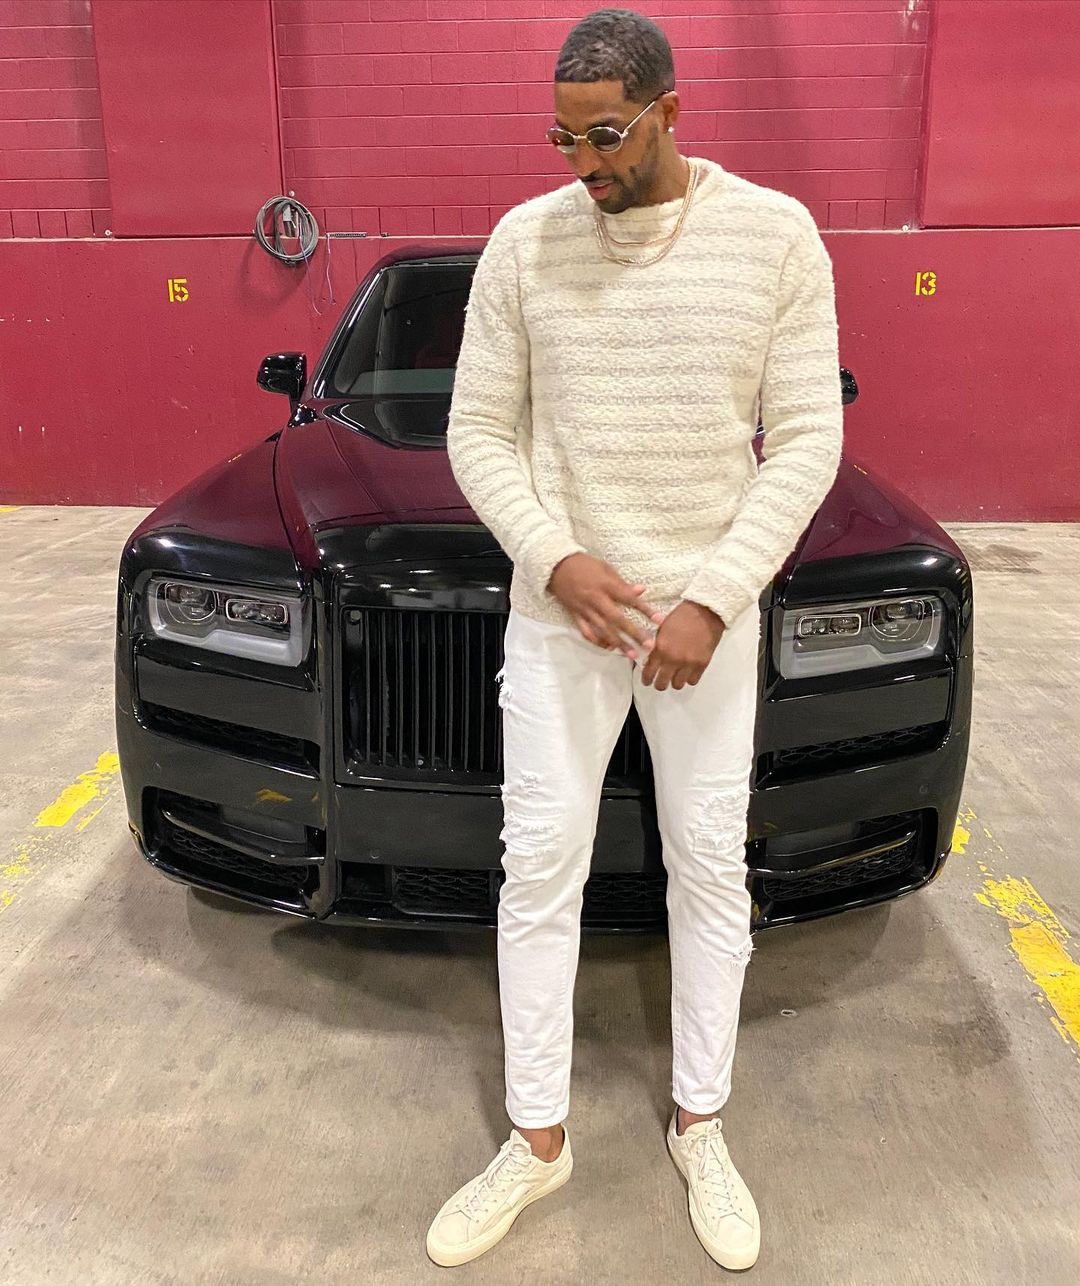 NBA King Tristan Thompson's $3.2 Million Car Collection - Including Three Rolls-Royces Worth $993,000 After Cavaliers Reunion